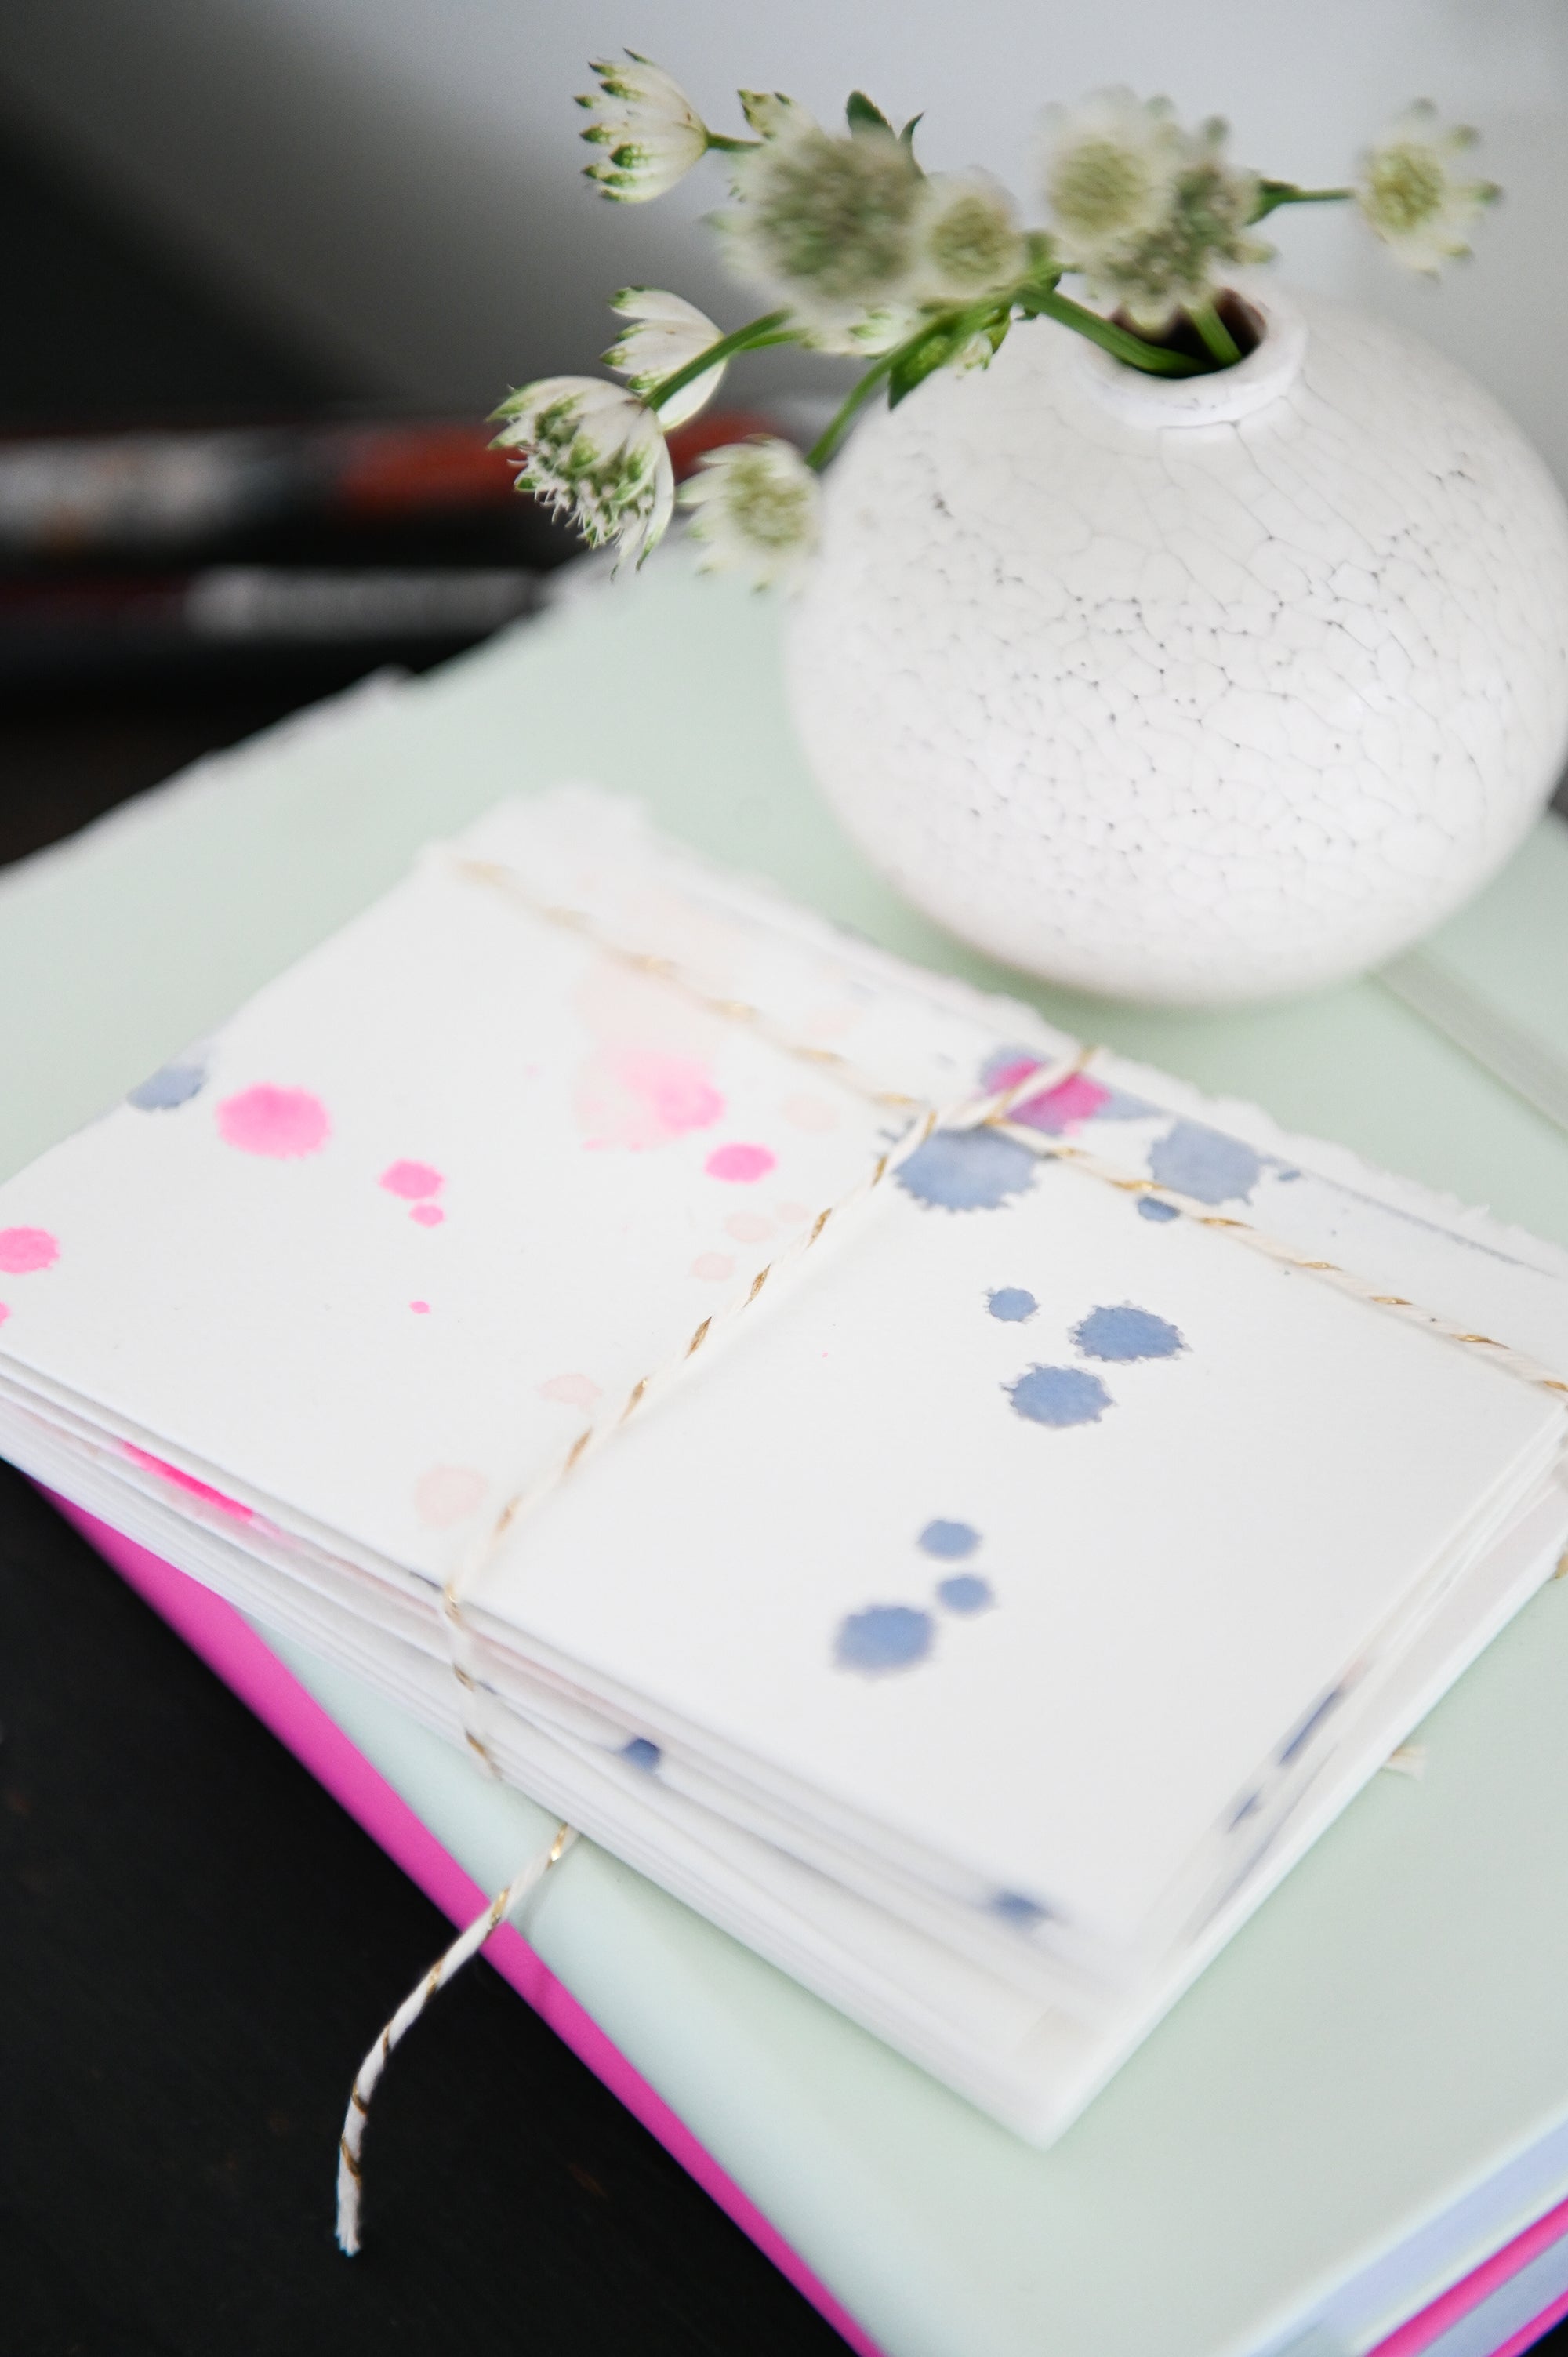 A stack of hand painted blank note cards sitting on top of a mint green and pink notebook, next to a small ceramic bud vase.  The cards are splatter paintied minimally with pink and blue watercolour dots.